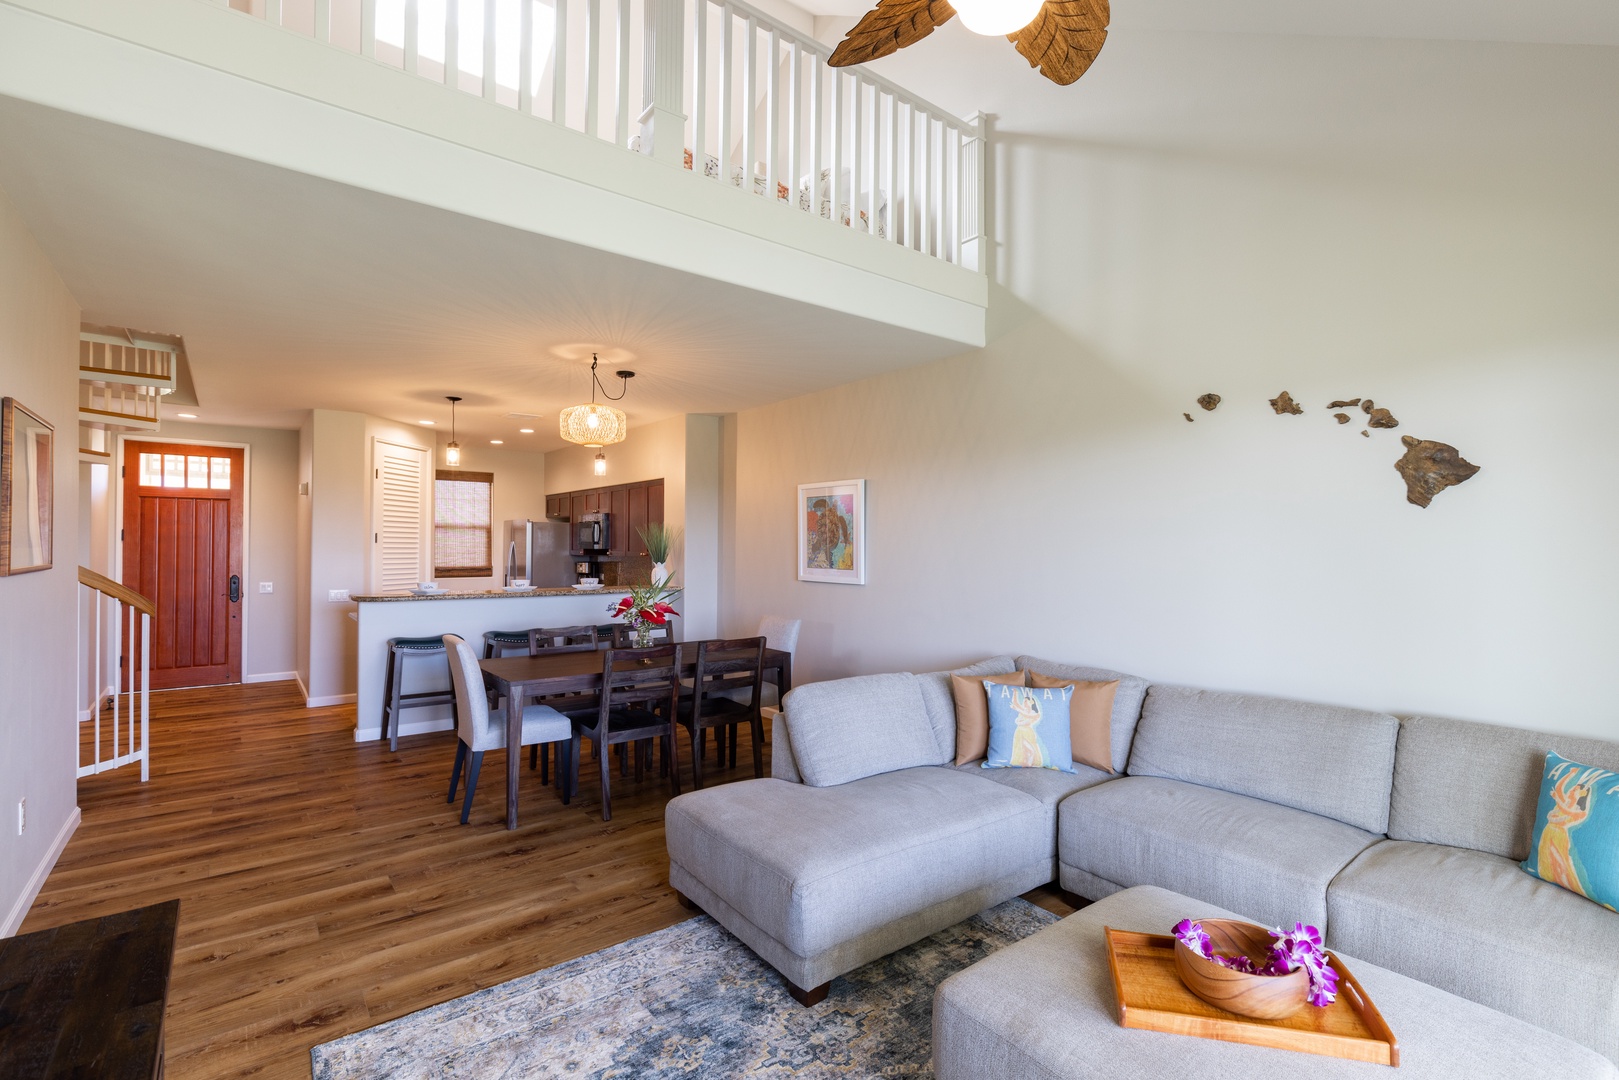 Waikoloa Vacation Rentals, Fairway Villas at Waikoloa Beach Resort E34 - The great room is very spacious for the whole family to be together